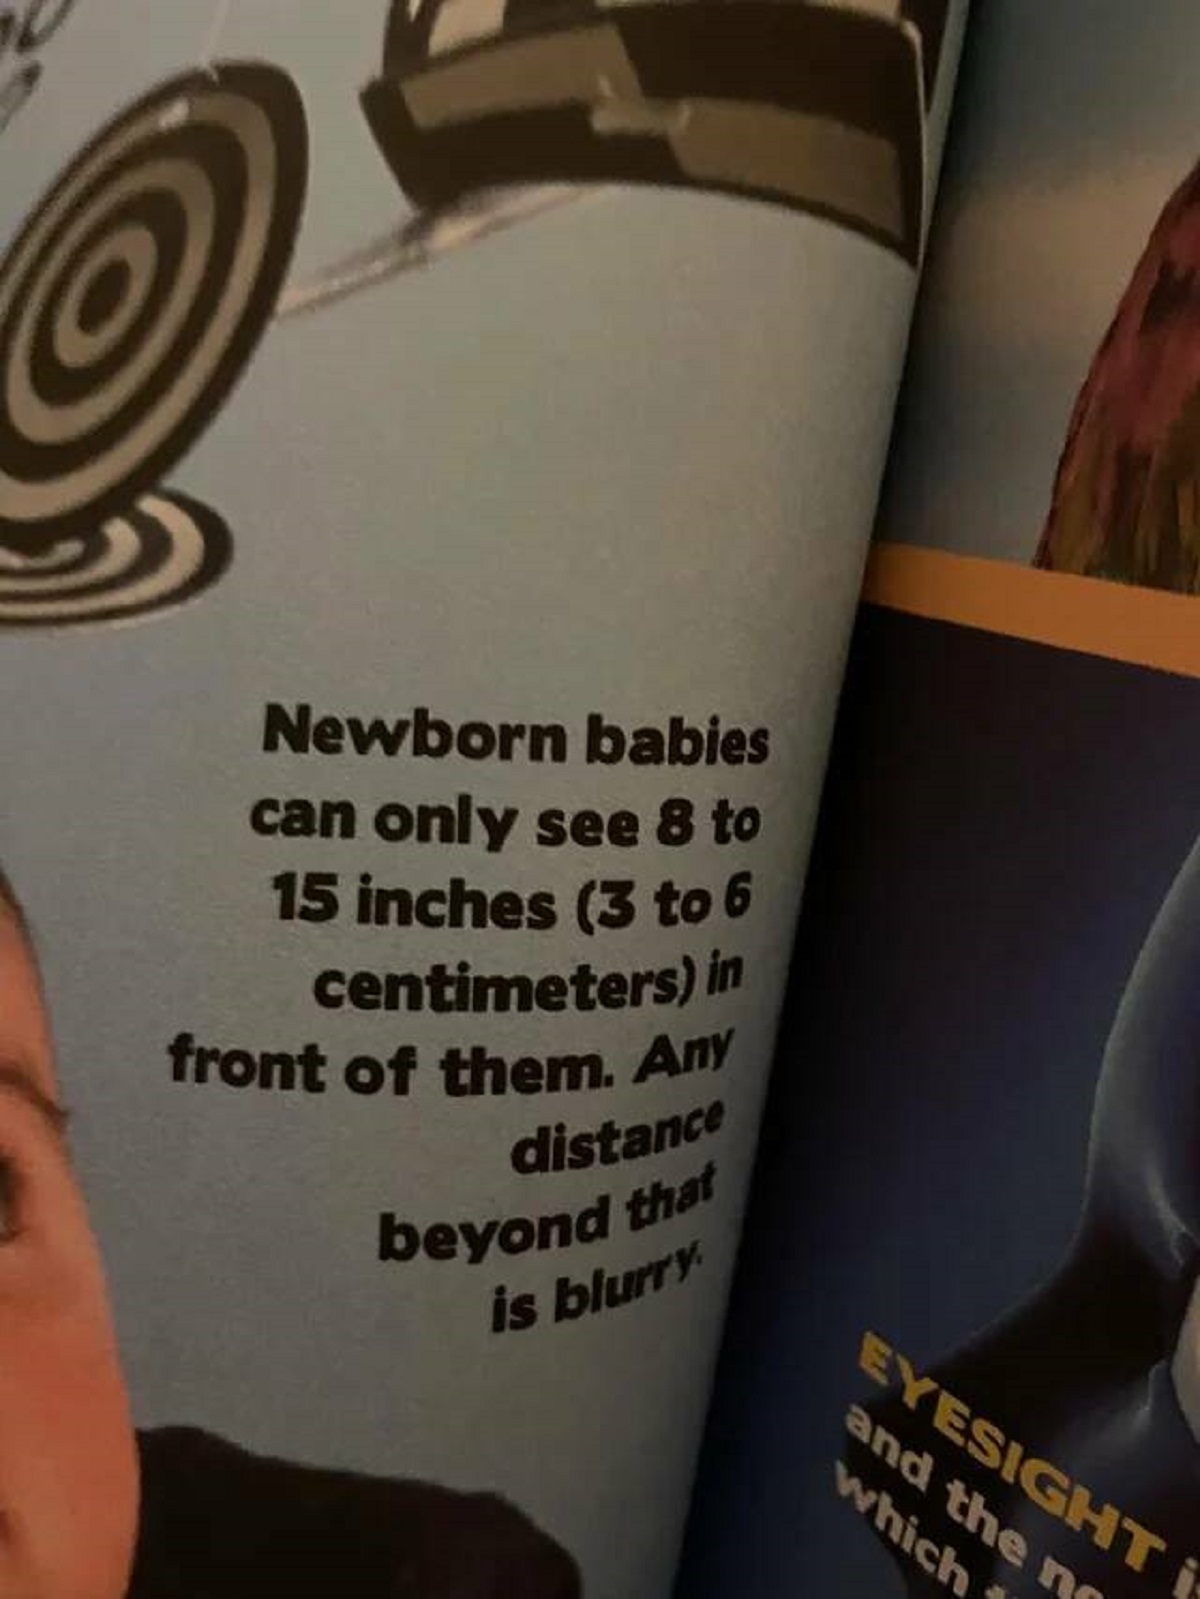 arm - Newborn babies can only see 8 to 15 inches 3 to 6 centimeters in front of them. Any distance that beyond is blurry Eyesight and the no which